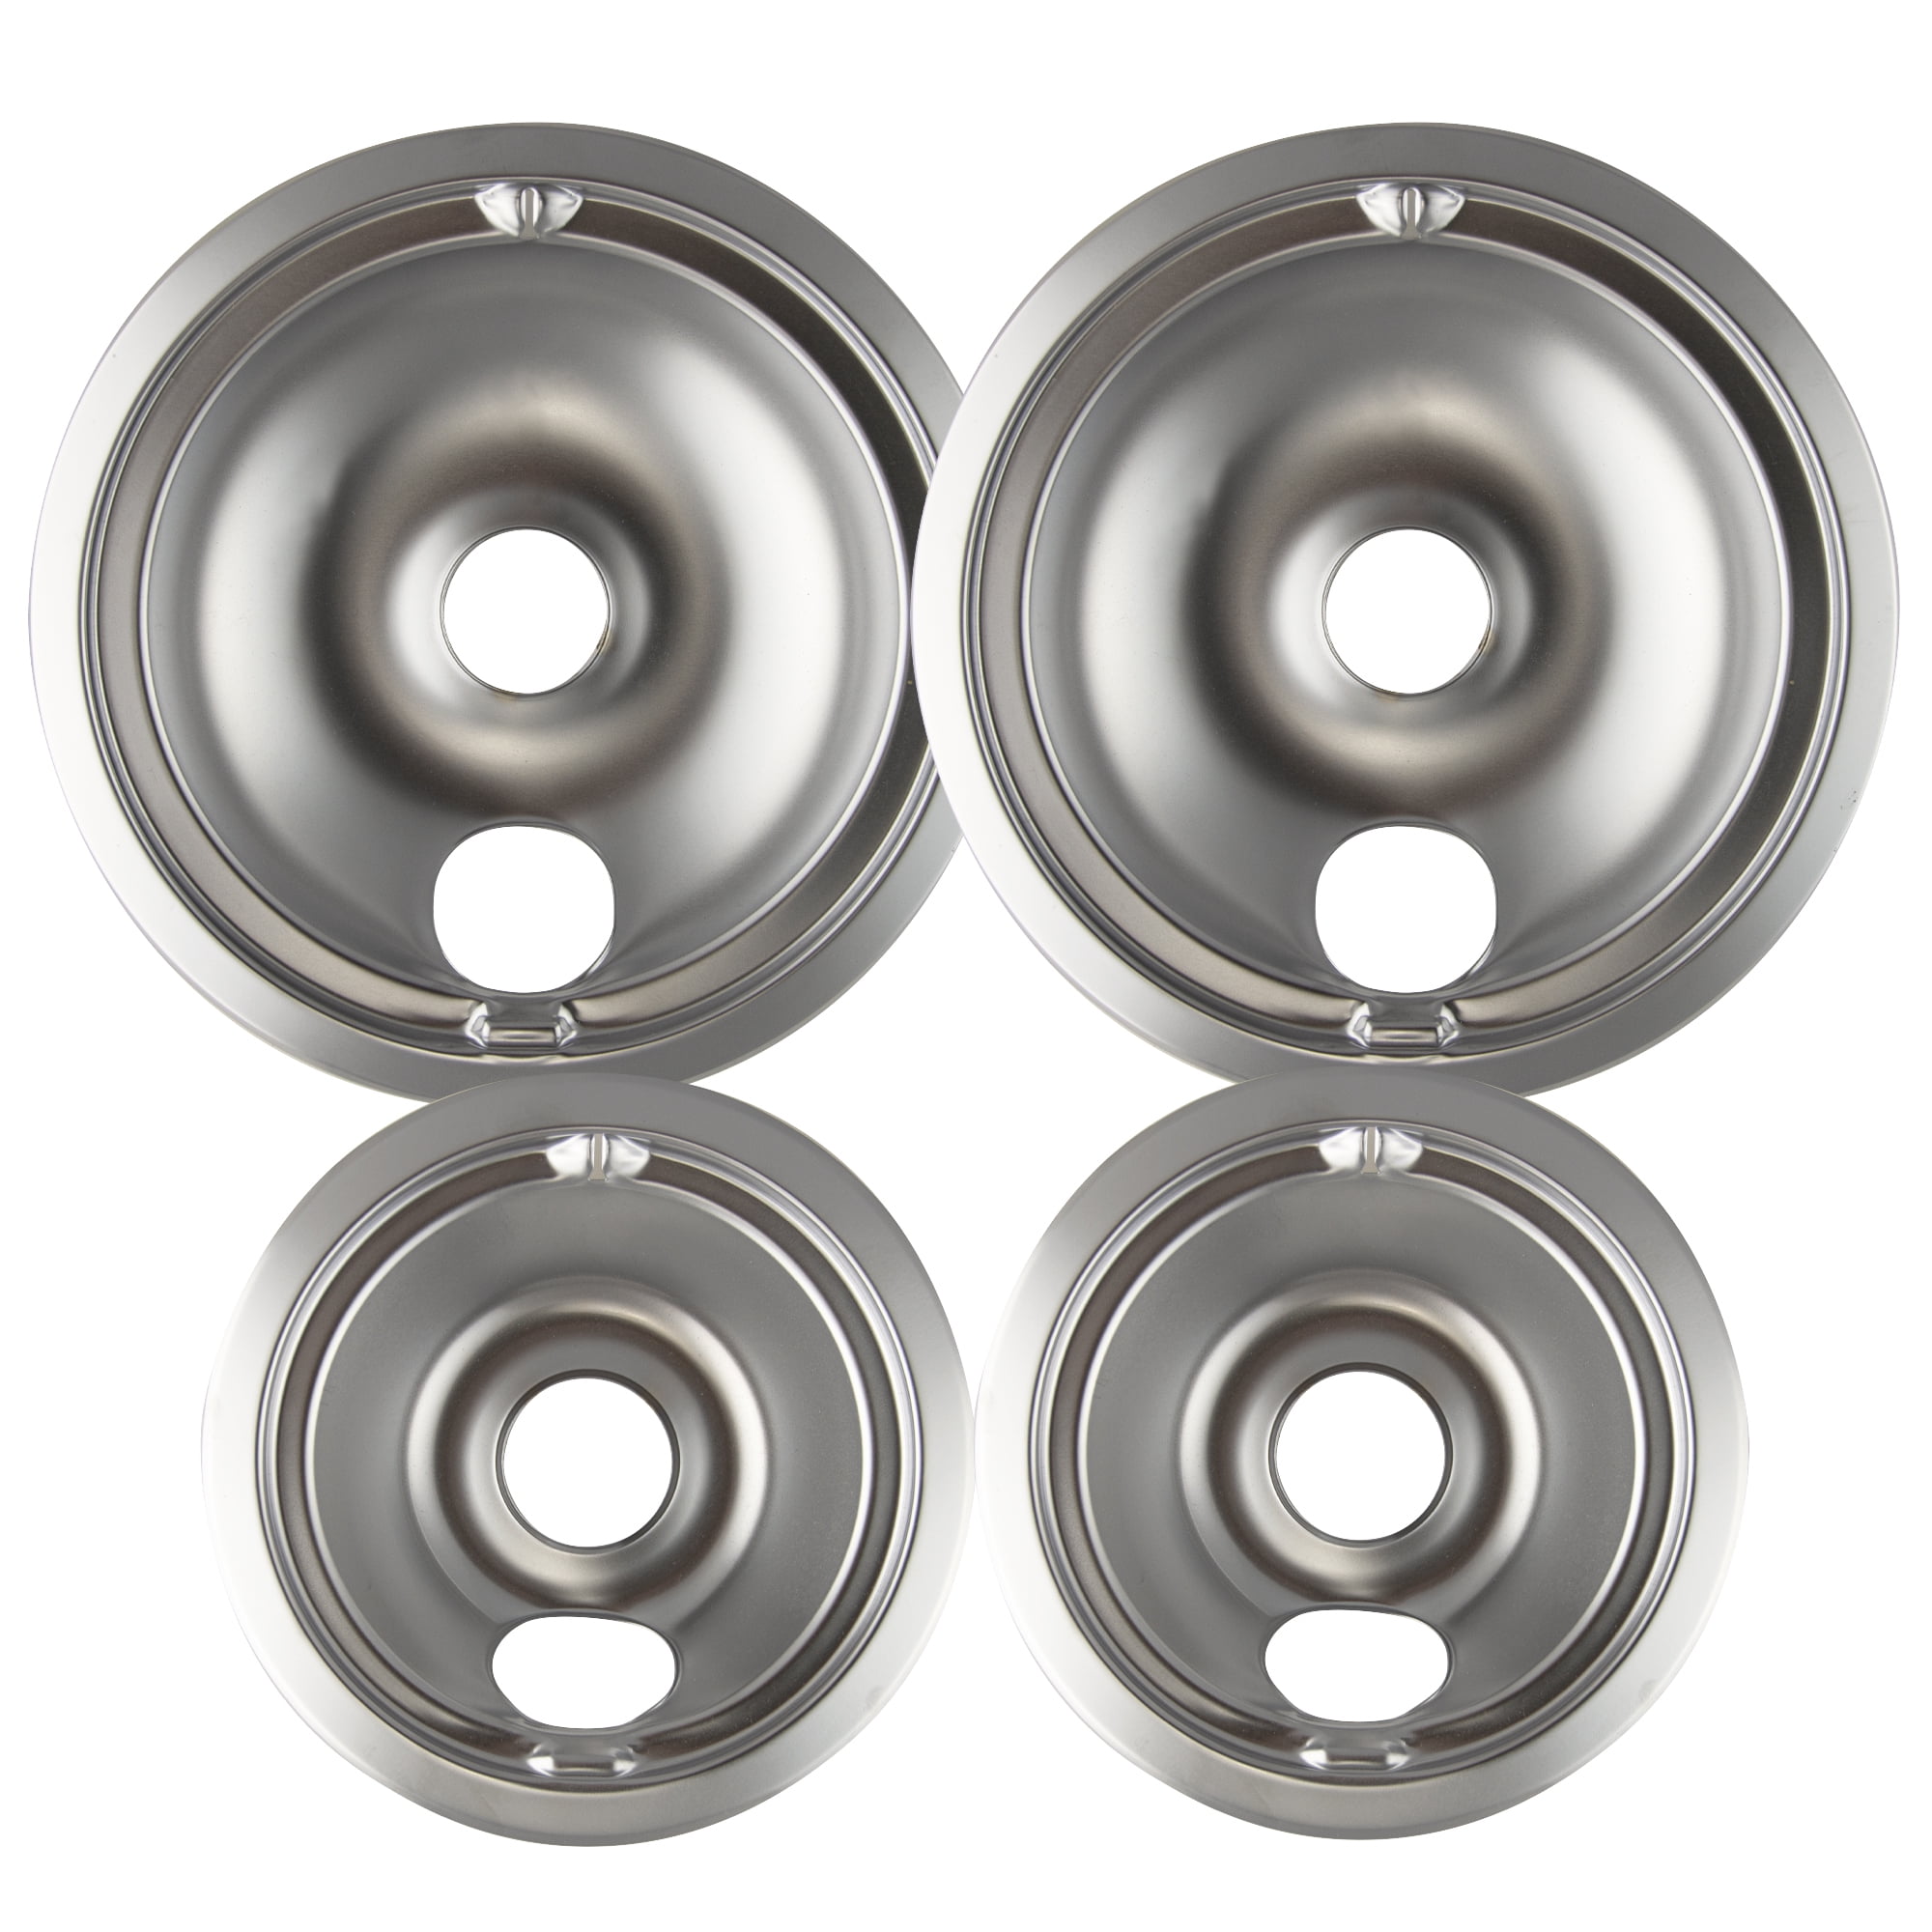 Stanco 4 Pack GE/Hotpoint Electric Range Chrome Reflector Bowls With Locking 